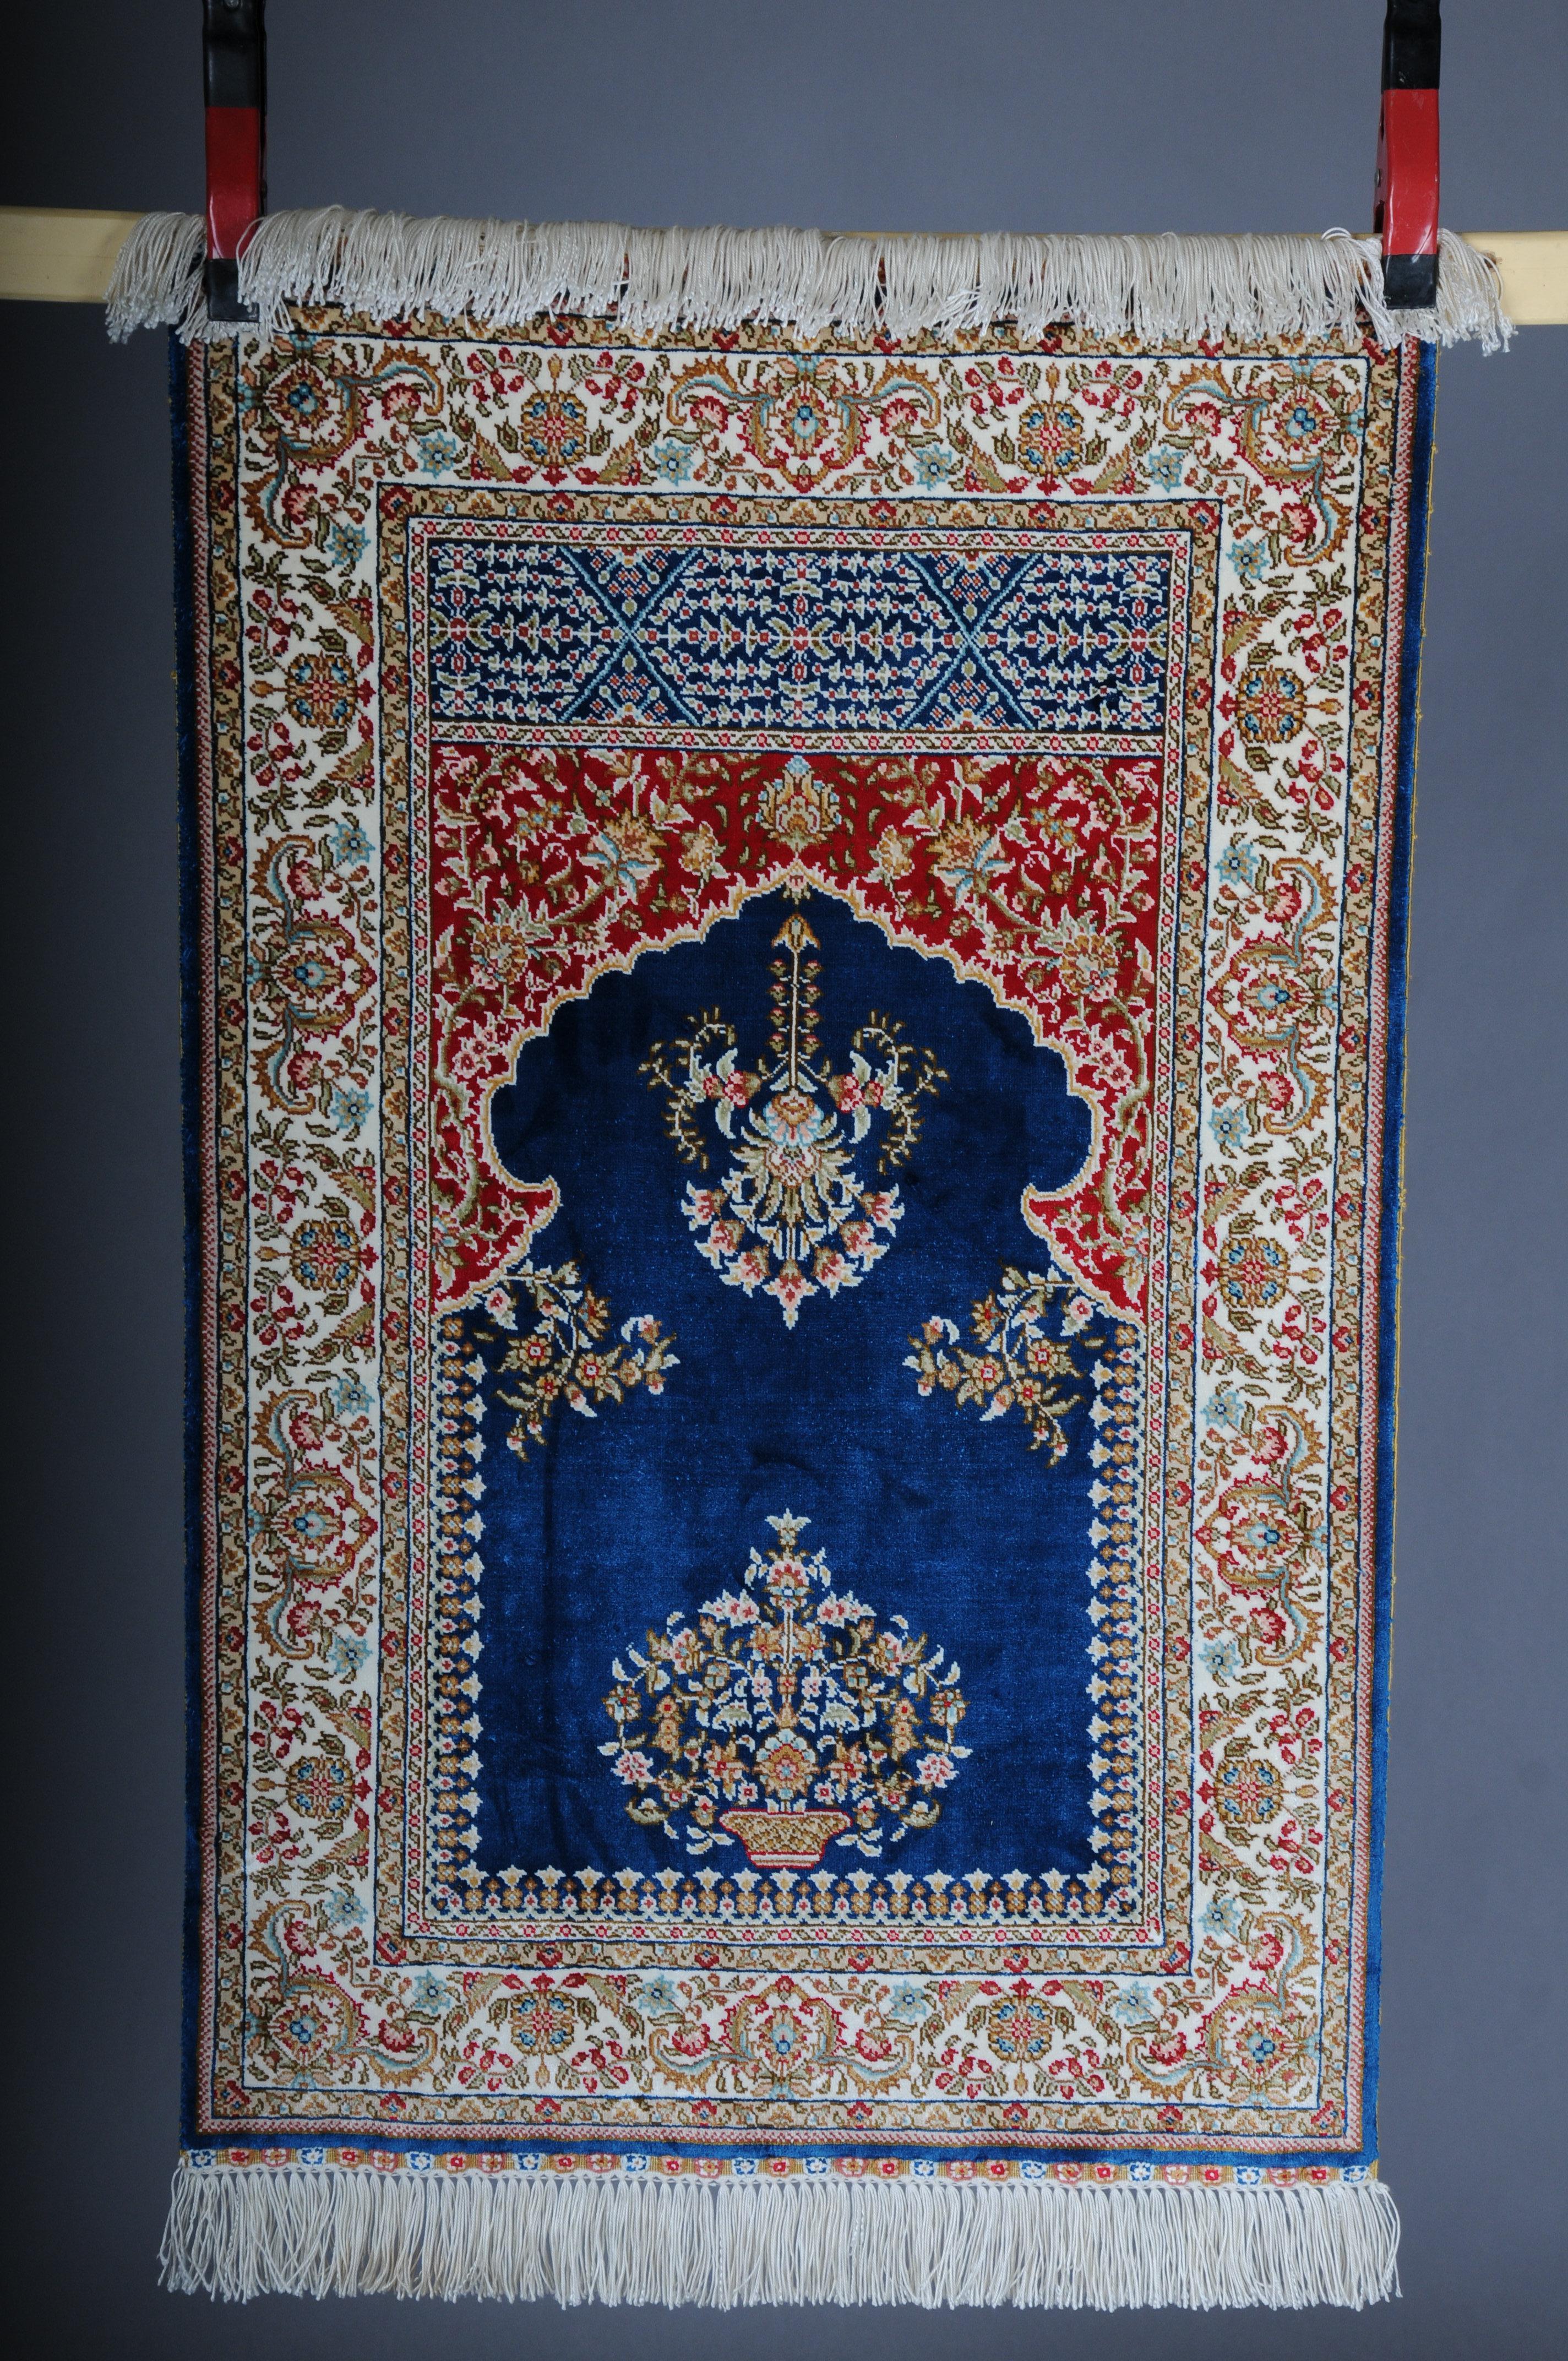 Anatolian prayer rug/tapestry cotton/silk, 20th century

This hand-knotted Hereke rug is a magnificent addition to your living space. Once intended for imperial palaces, the detailed work of art now decorates your home. Only natural materials are